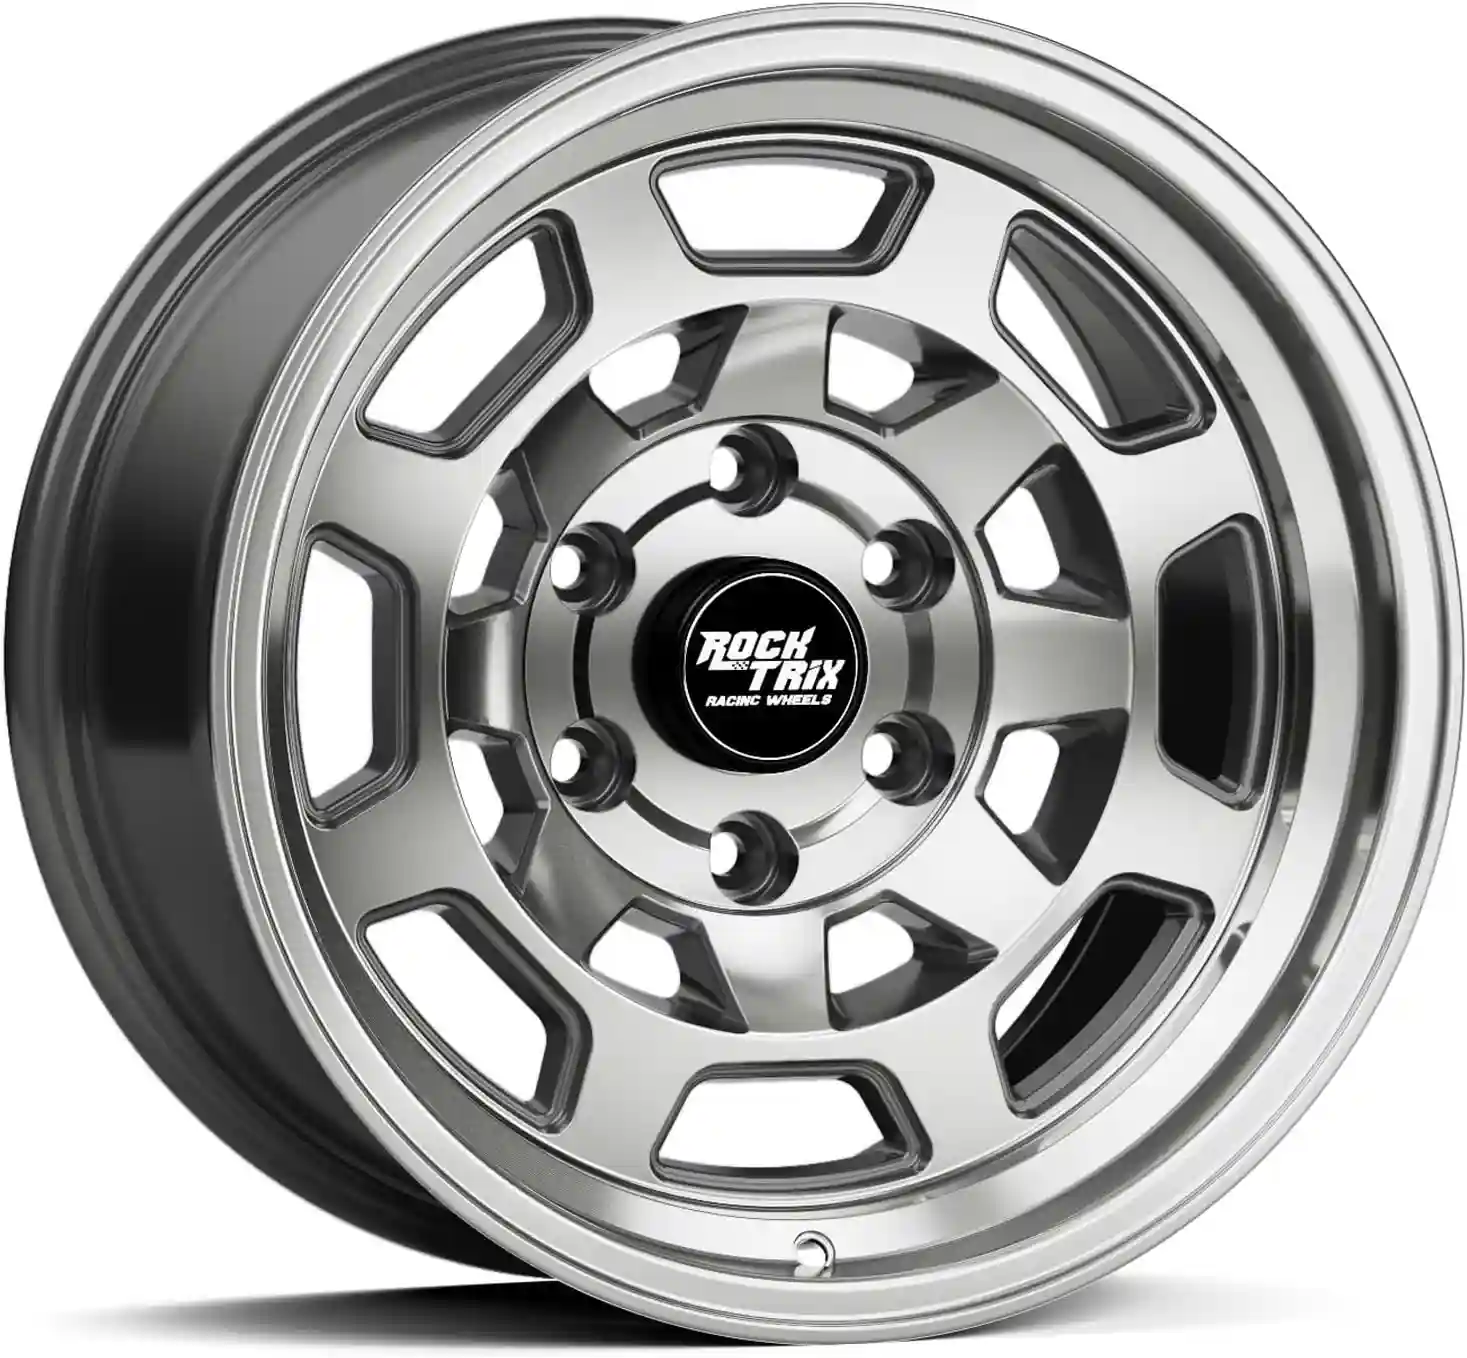 RockTrix RT117 17 inch Wheel Compatible with 2009-2024 Ford F150, 17x9 6x135 Wheels (-12mm Offset, 4.5in Backspace) 87.1mm Bore, Gunmetal Polished Wheels, Also fits 2022+ Bronco Raptor Rims